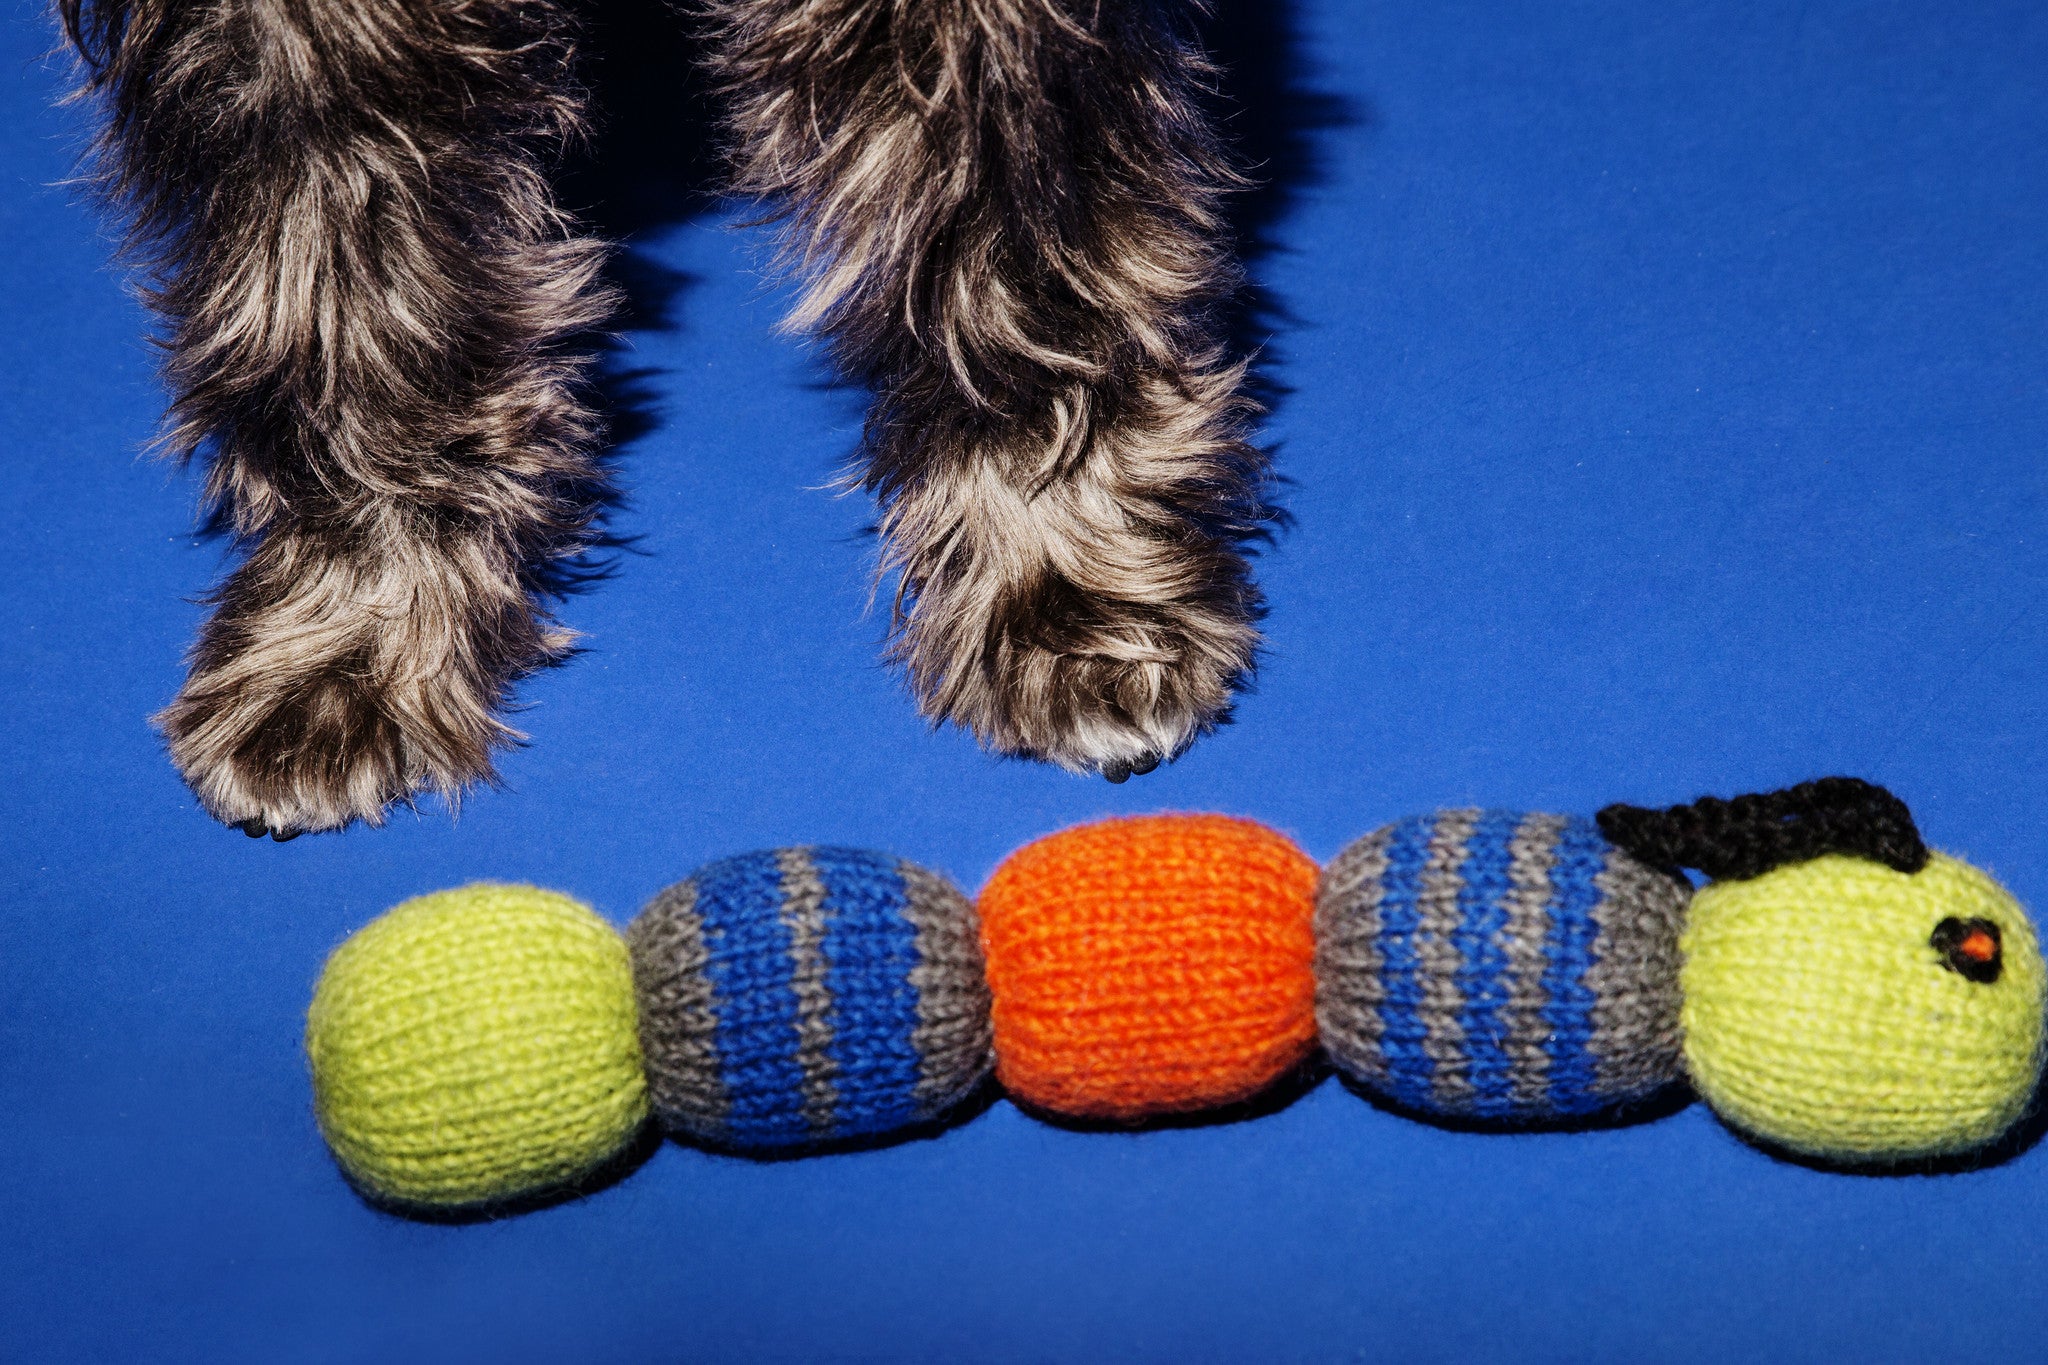 Dog Toy: Hand Knitted Caterpillar